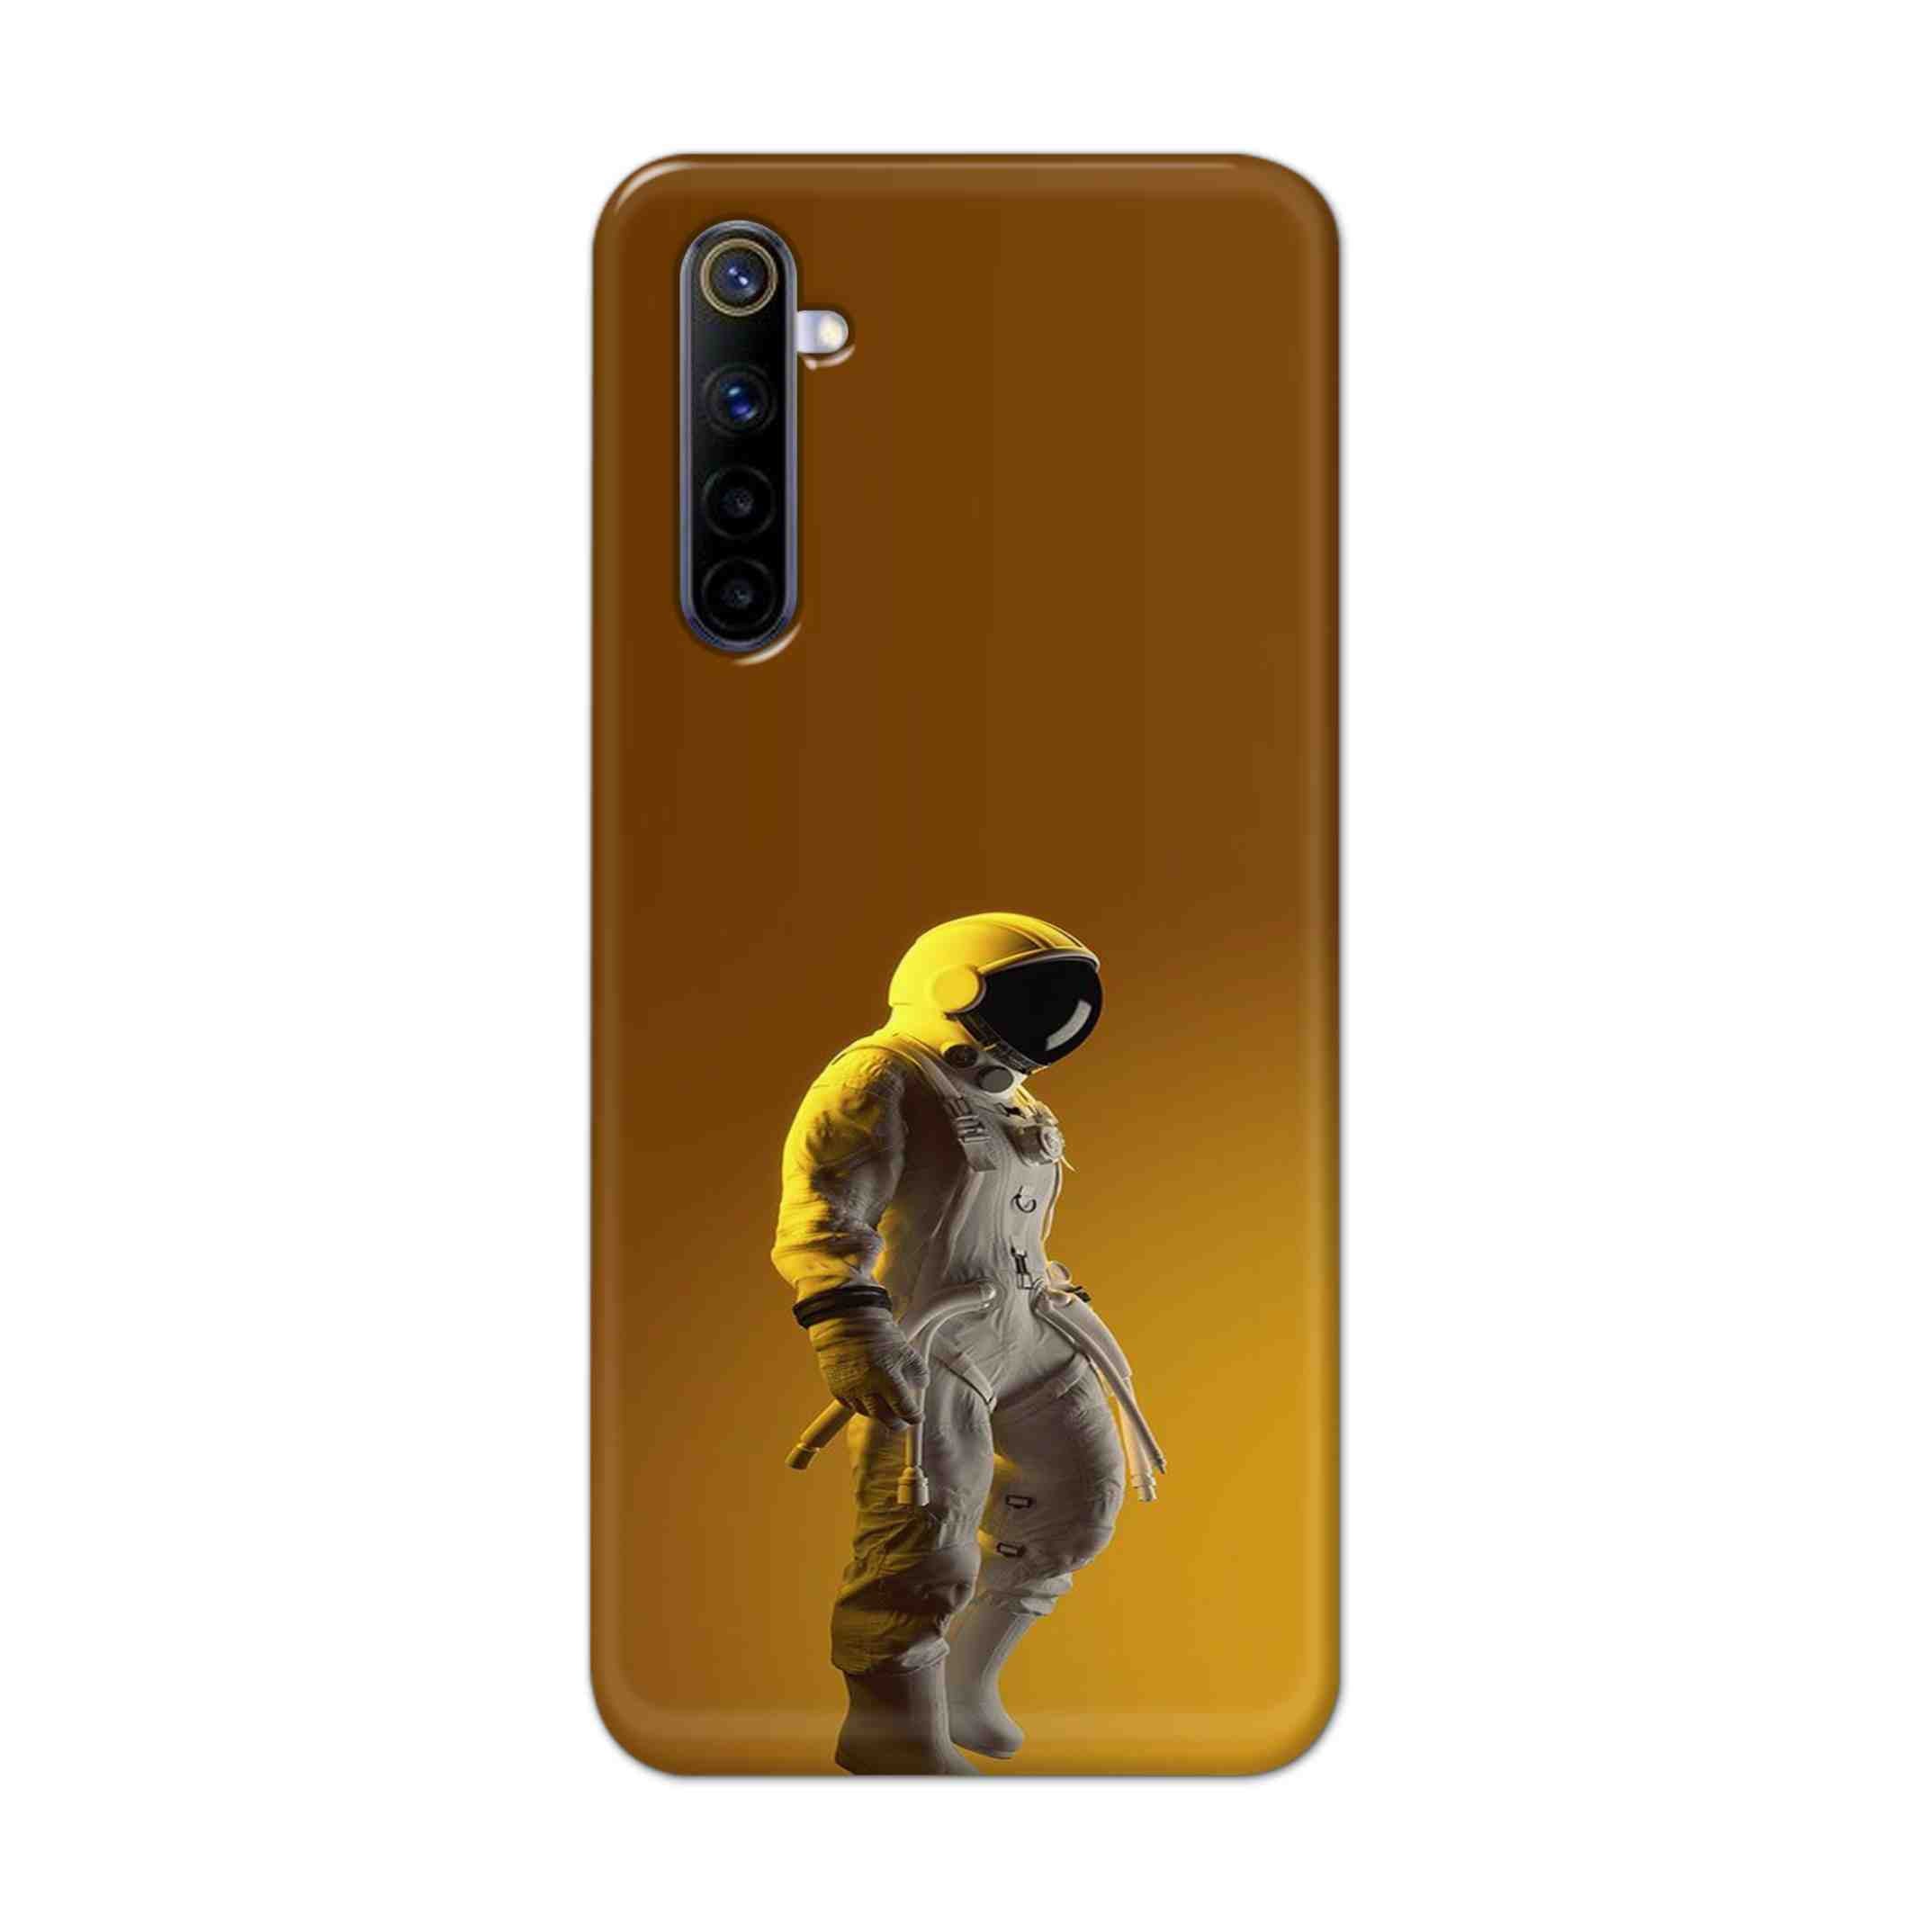 Buy Yellow Astronaut Hard Back Mobile Phone Case Cover For REALME 6 Online